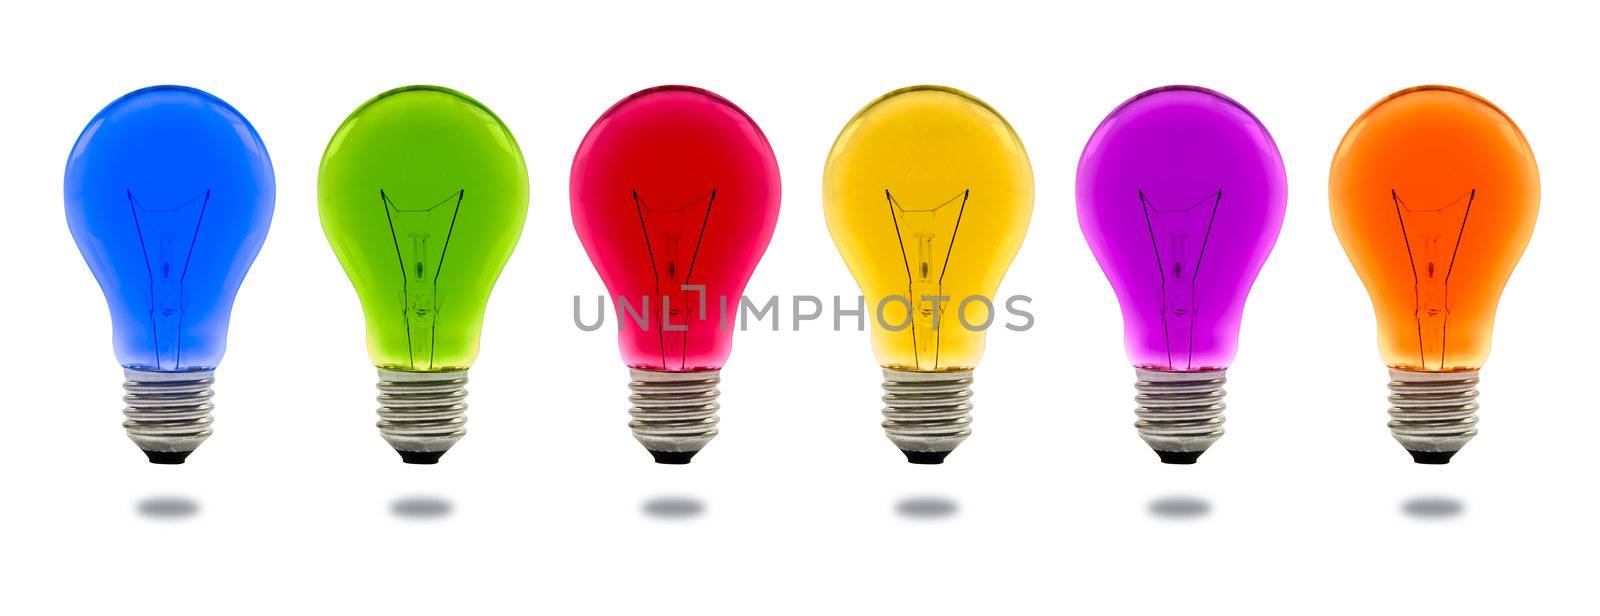 colorful light bulb isolated on white background